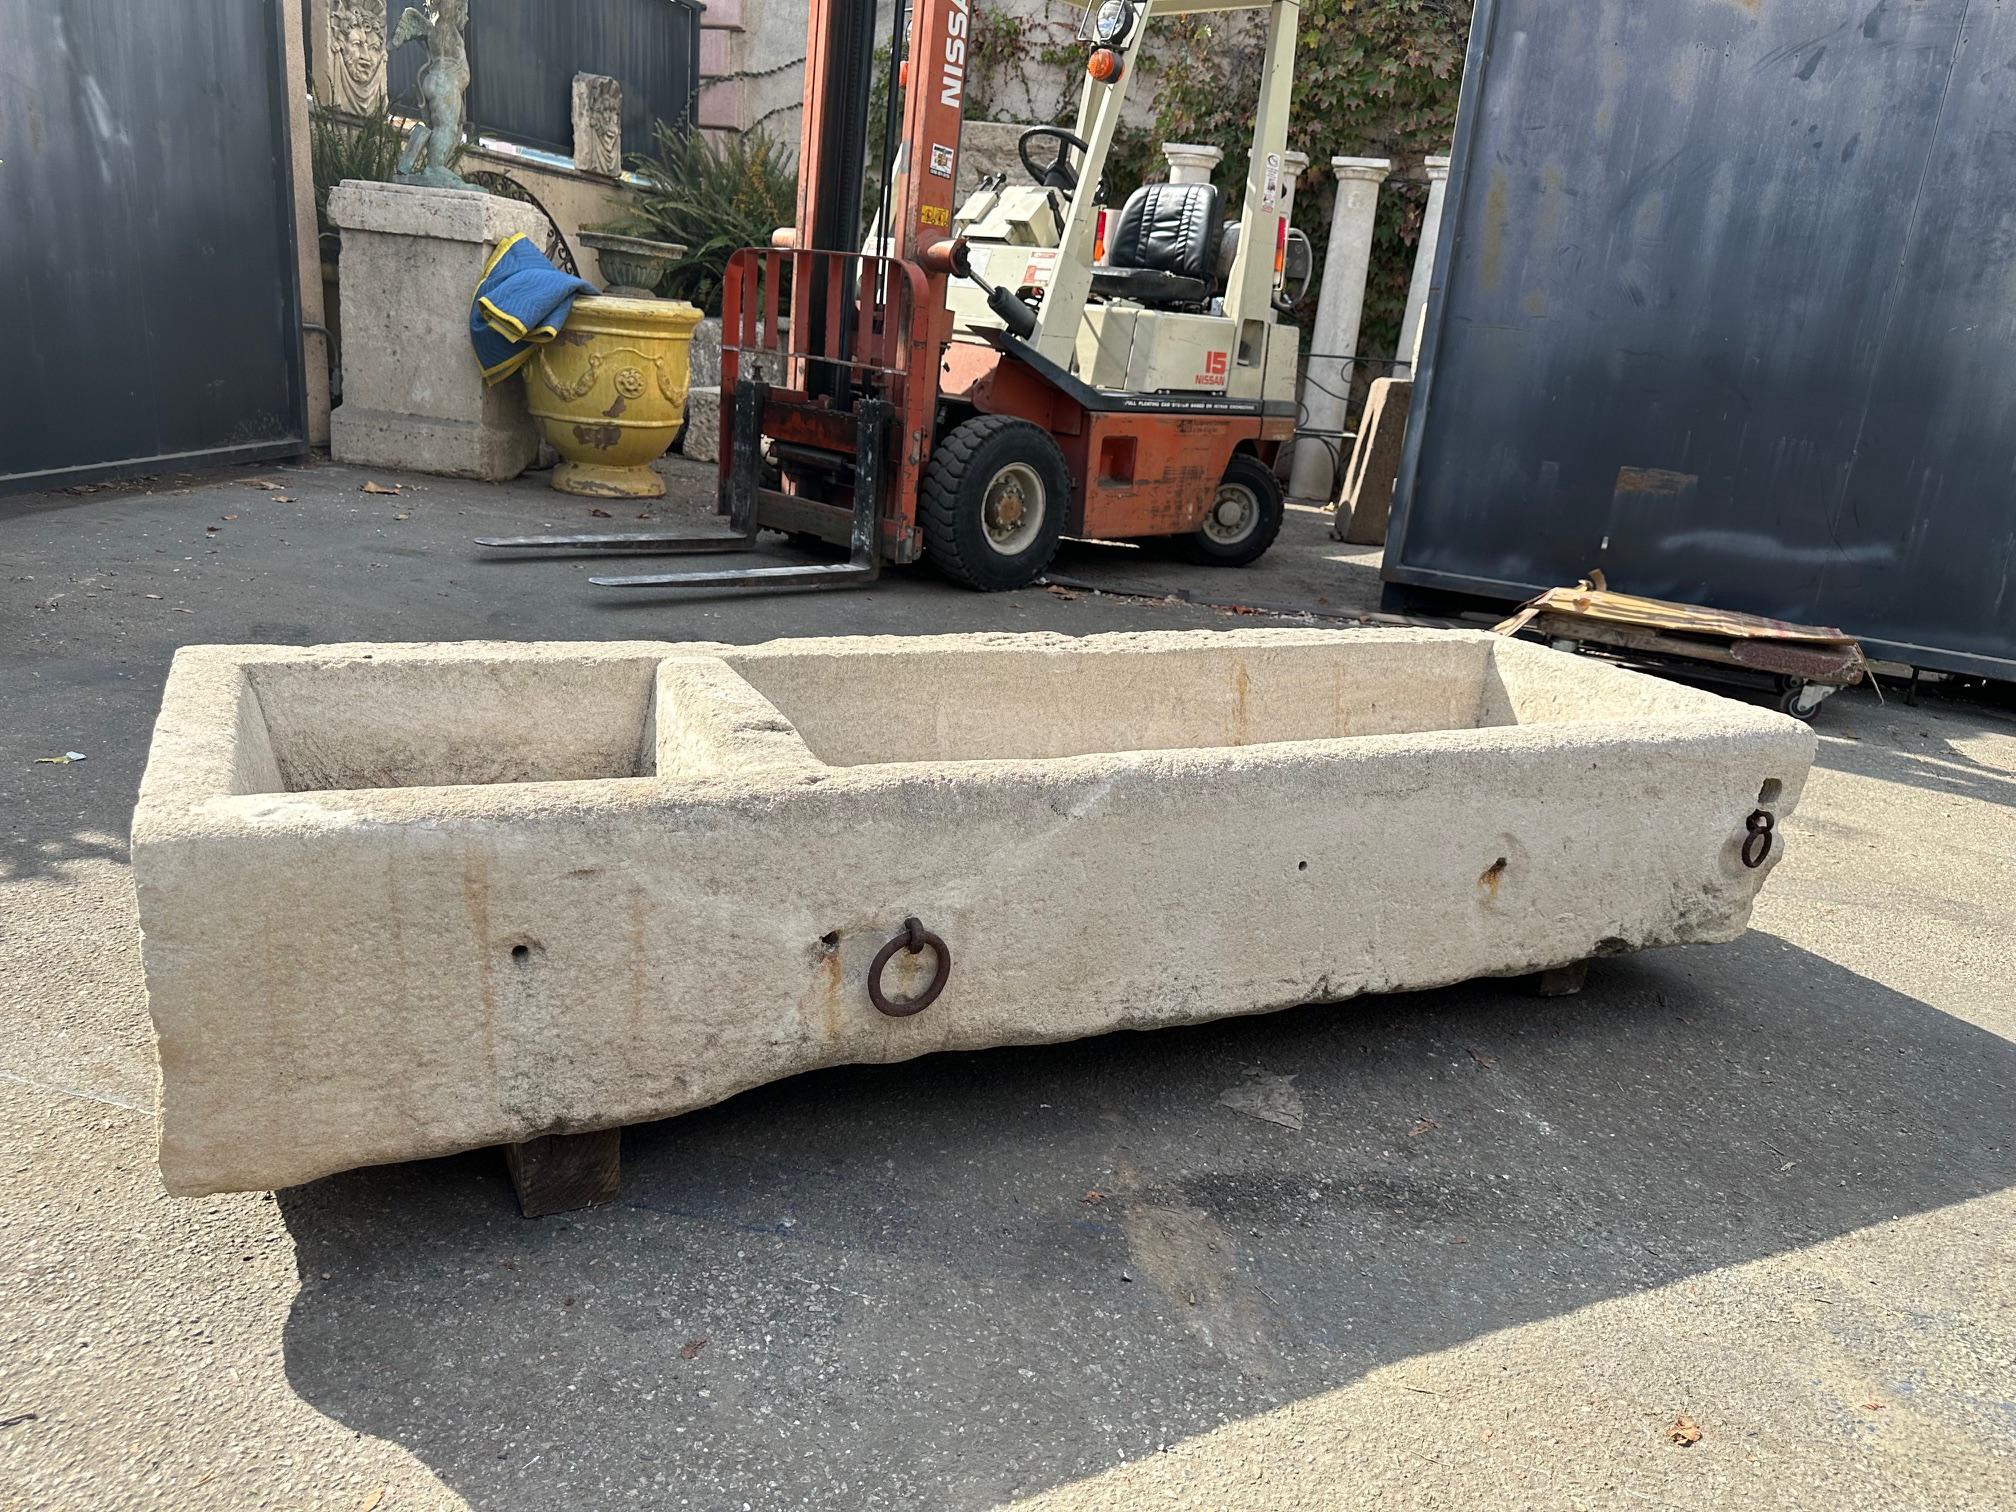 Hand Carved Stone Trough Fountain Basin Farm Sink Planter Firepit idea Rustic CA. Exquisite Very Long 18th century water fountain basin of hand carved stone . This trough could be installed with simple bronze spouts or a carved stone fountain head ,